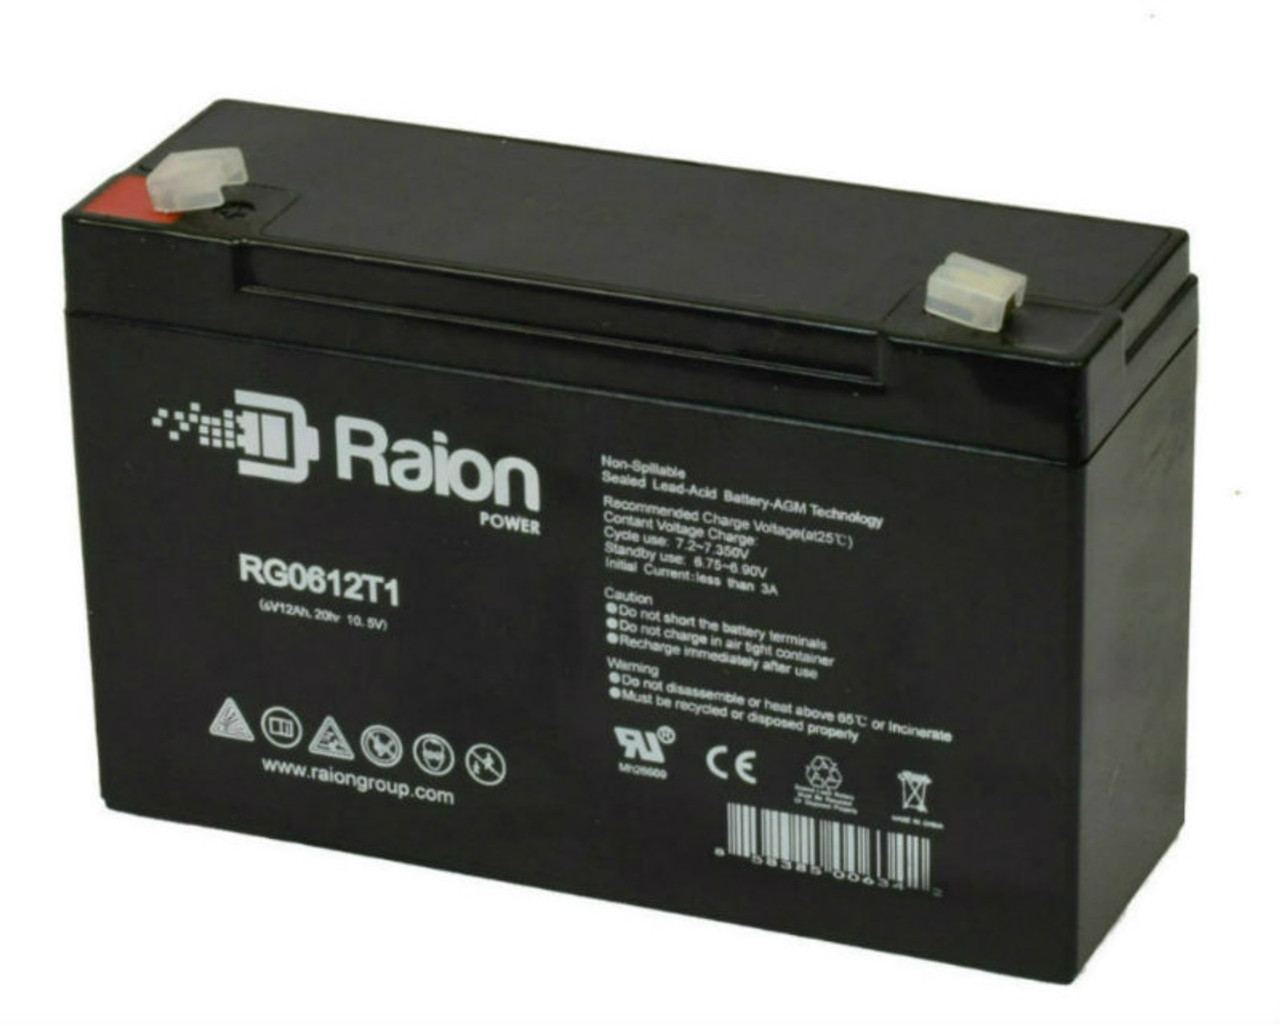 Raion Power RG06120T1 Replacement 6V 12Ah Emergency Light Battery for Dyna-Ray DR500